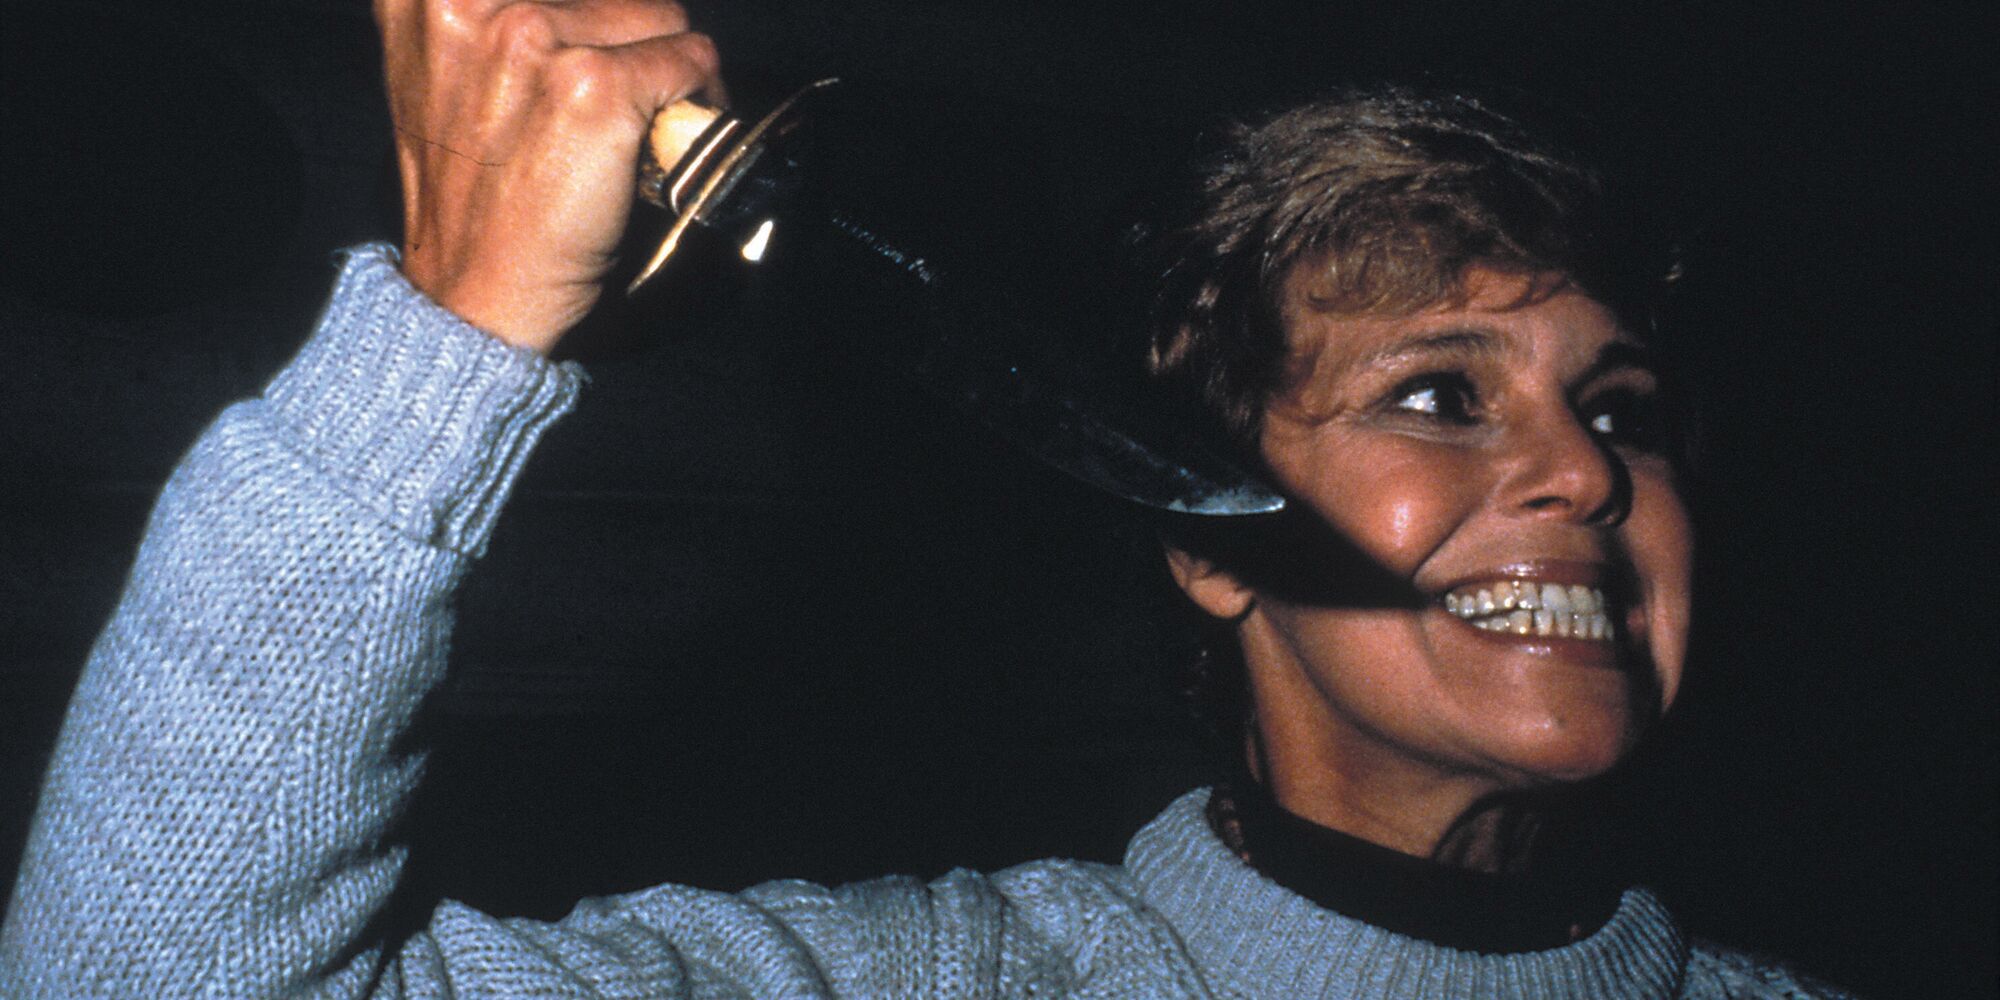  Pamela Voorhees holding a knife in Friday the 13th